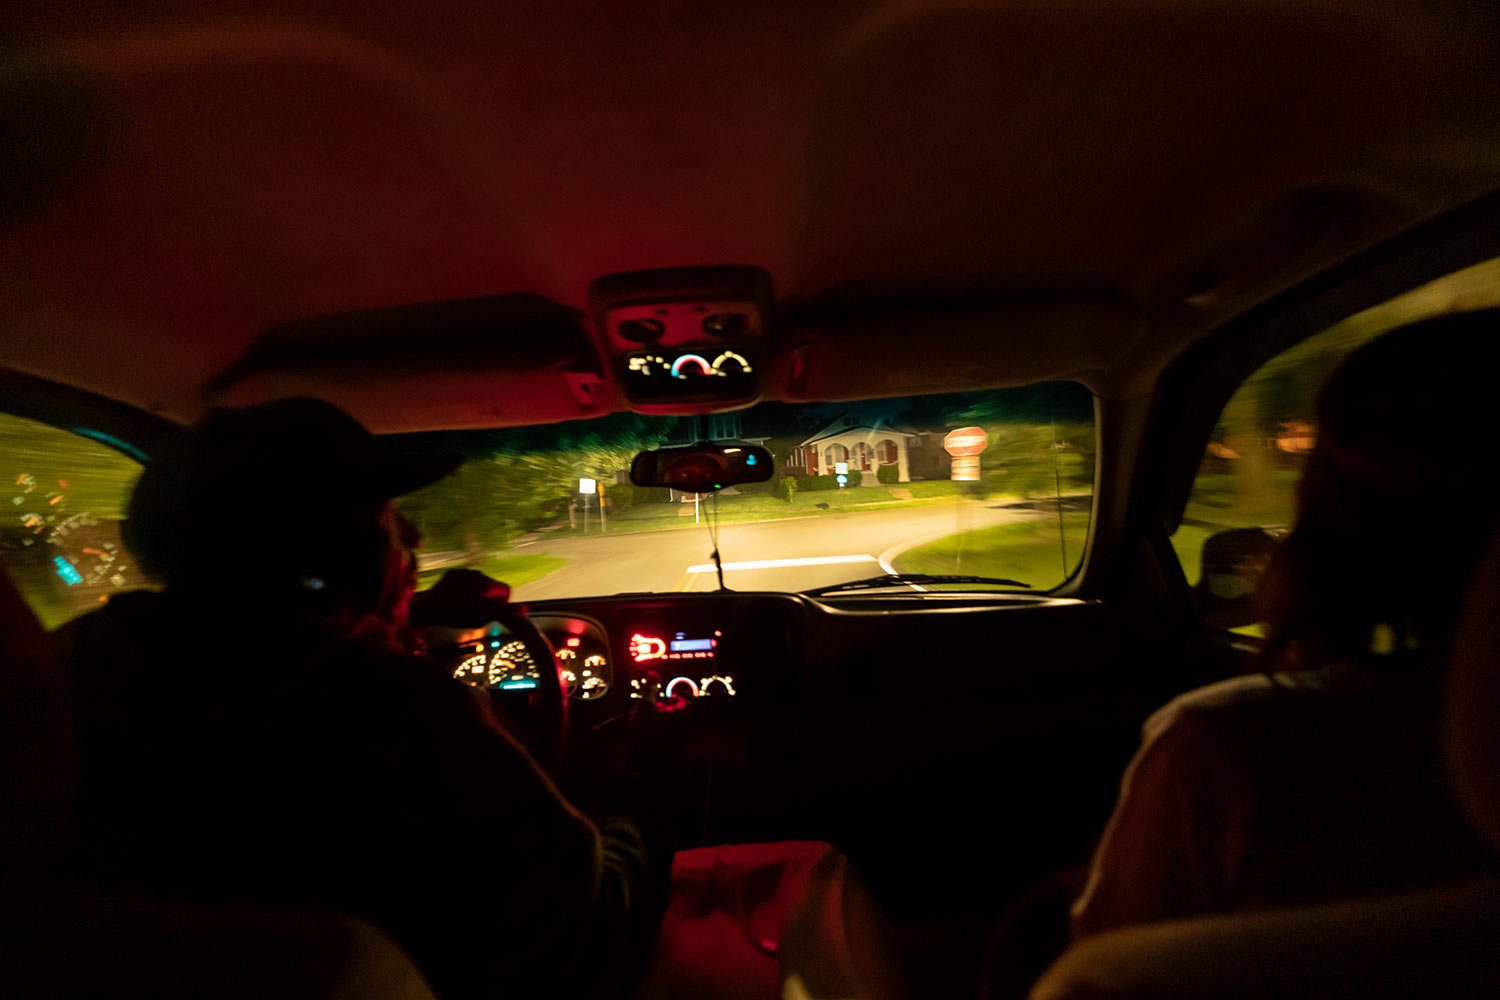  Navada Gwynn, left, drives his daughter, Victoria, 21, right, to a bus stop as she goes to work before dawn in Louisville, Ky, Tuesday, Aug. 29, 2023. (AP Photo/David Goldman)  